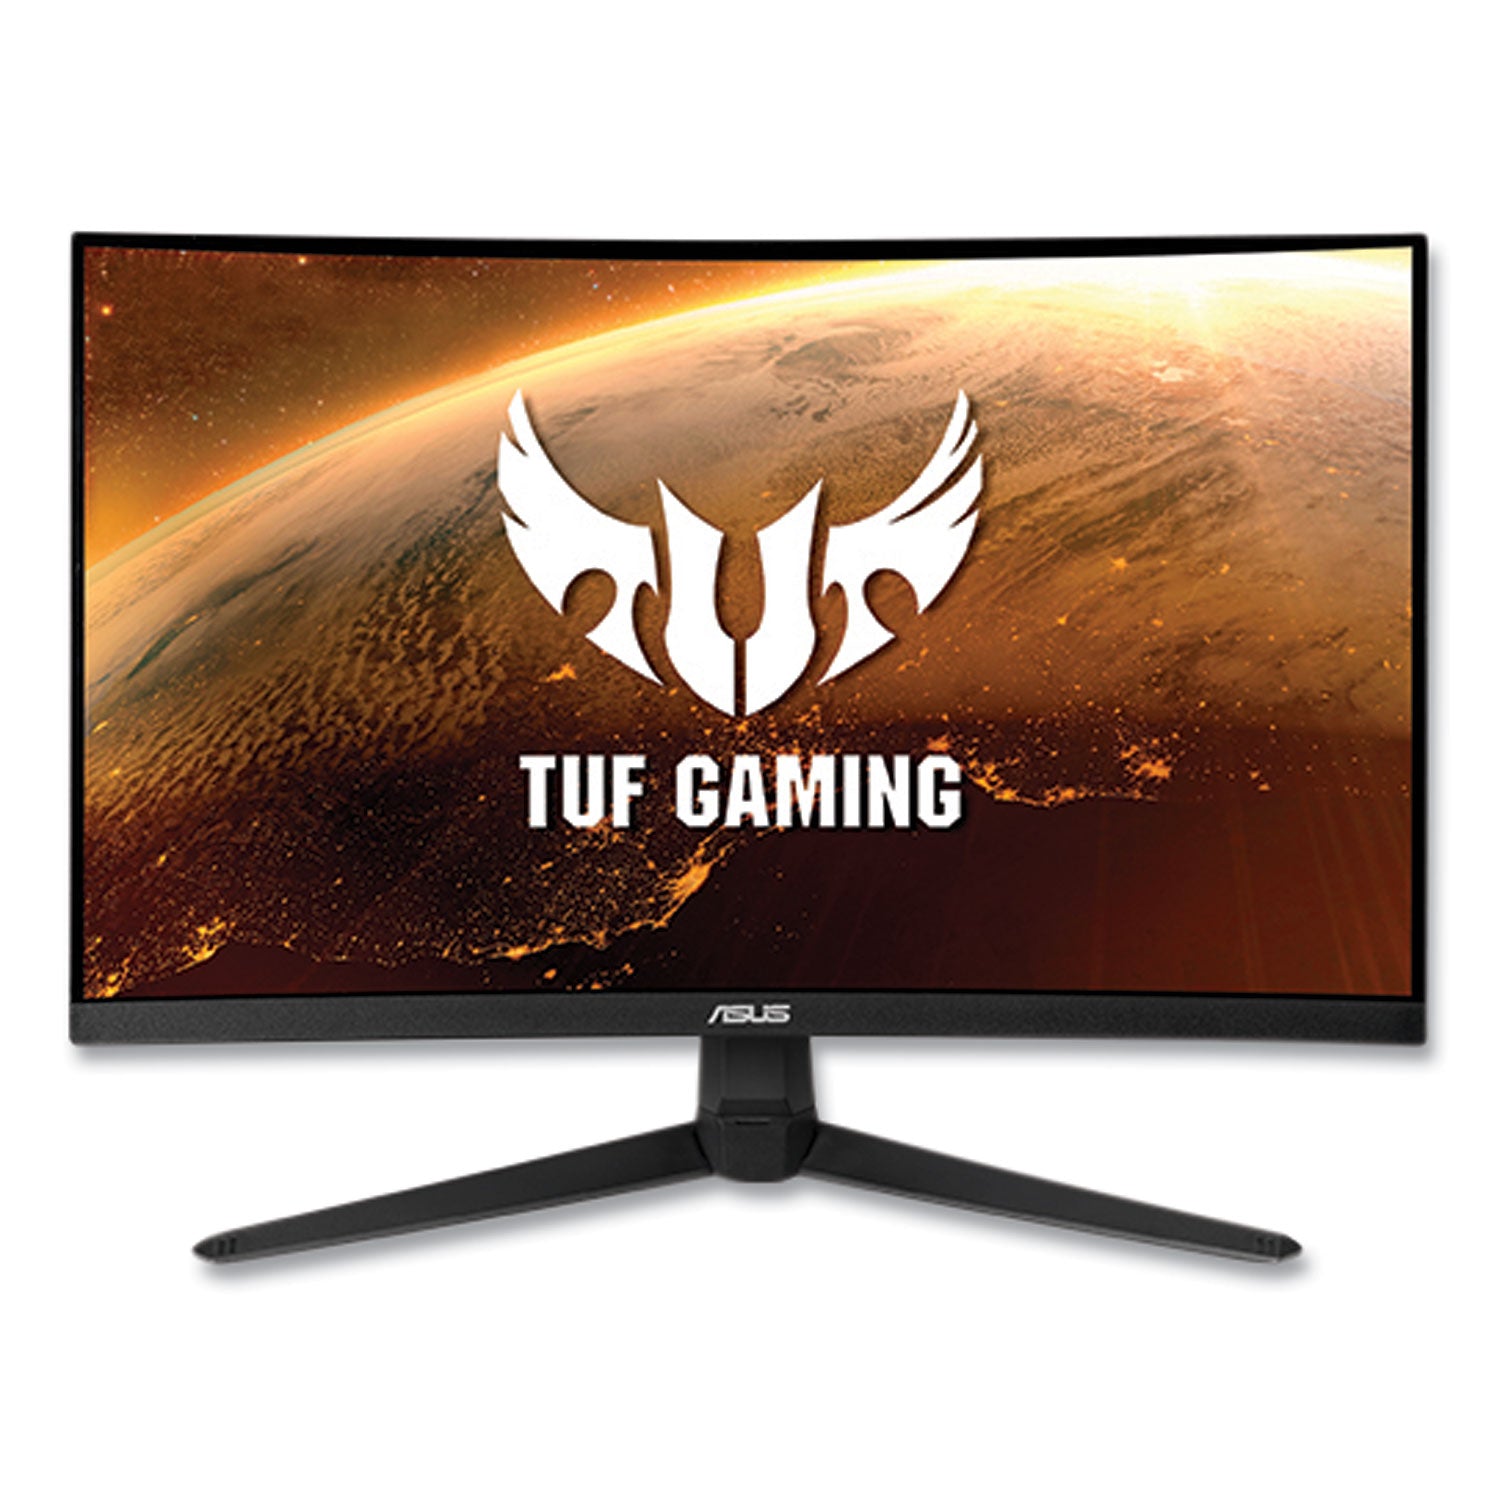 vg24vq1by-tuf-gaming-led-monitor-238-widescreen-va-panel-1920-pixels-x-1080-pixels_asuvg24vq1by - 1